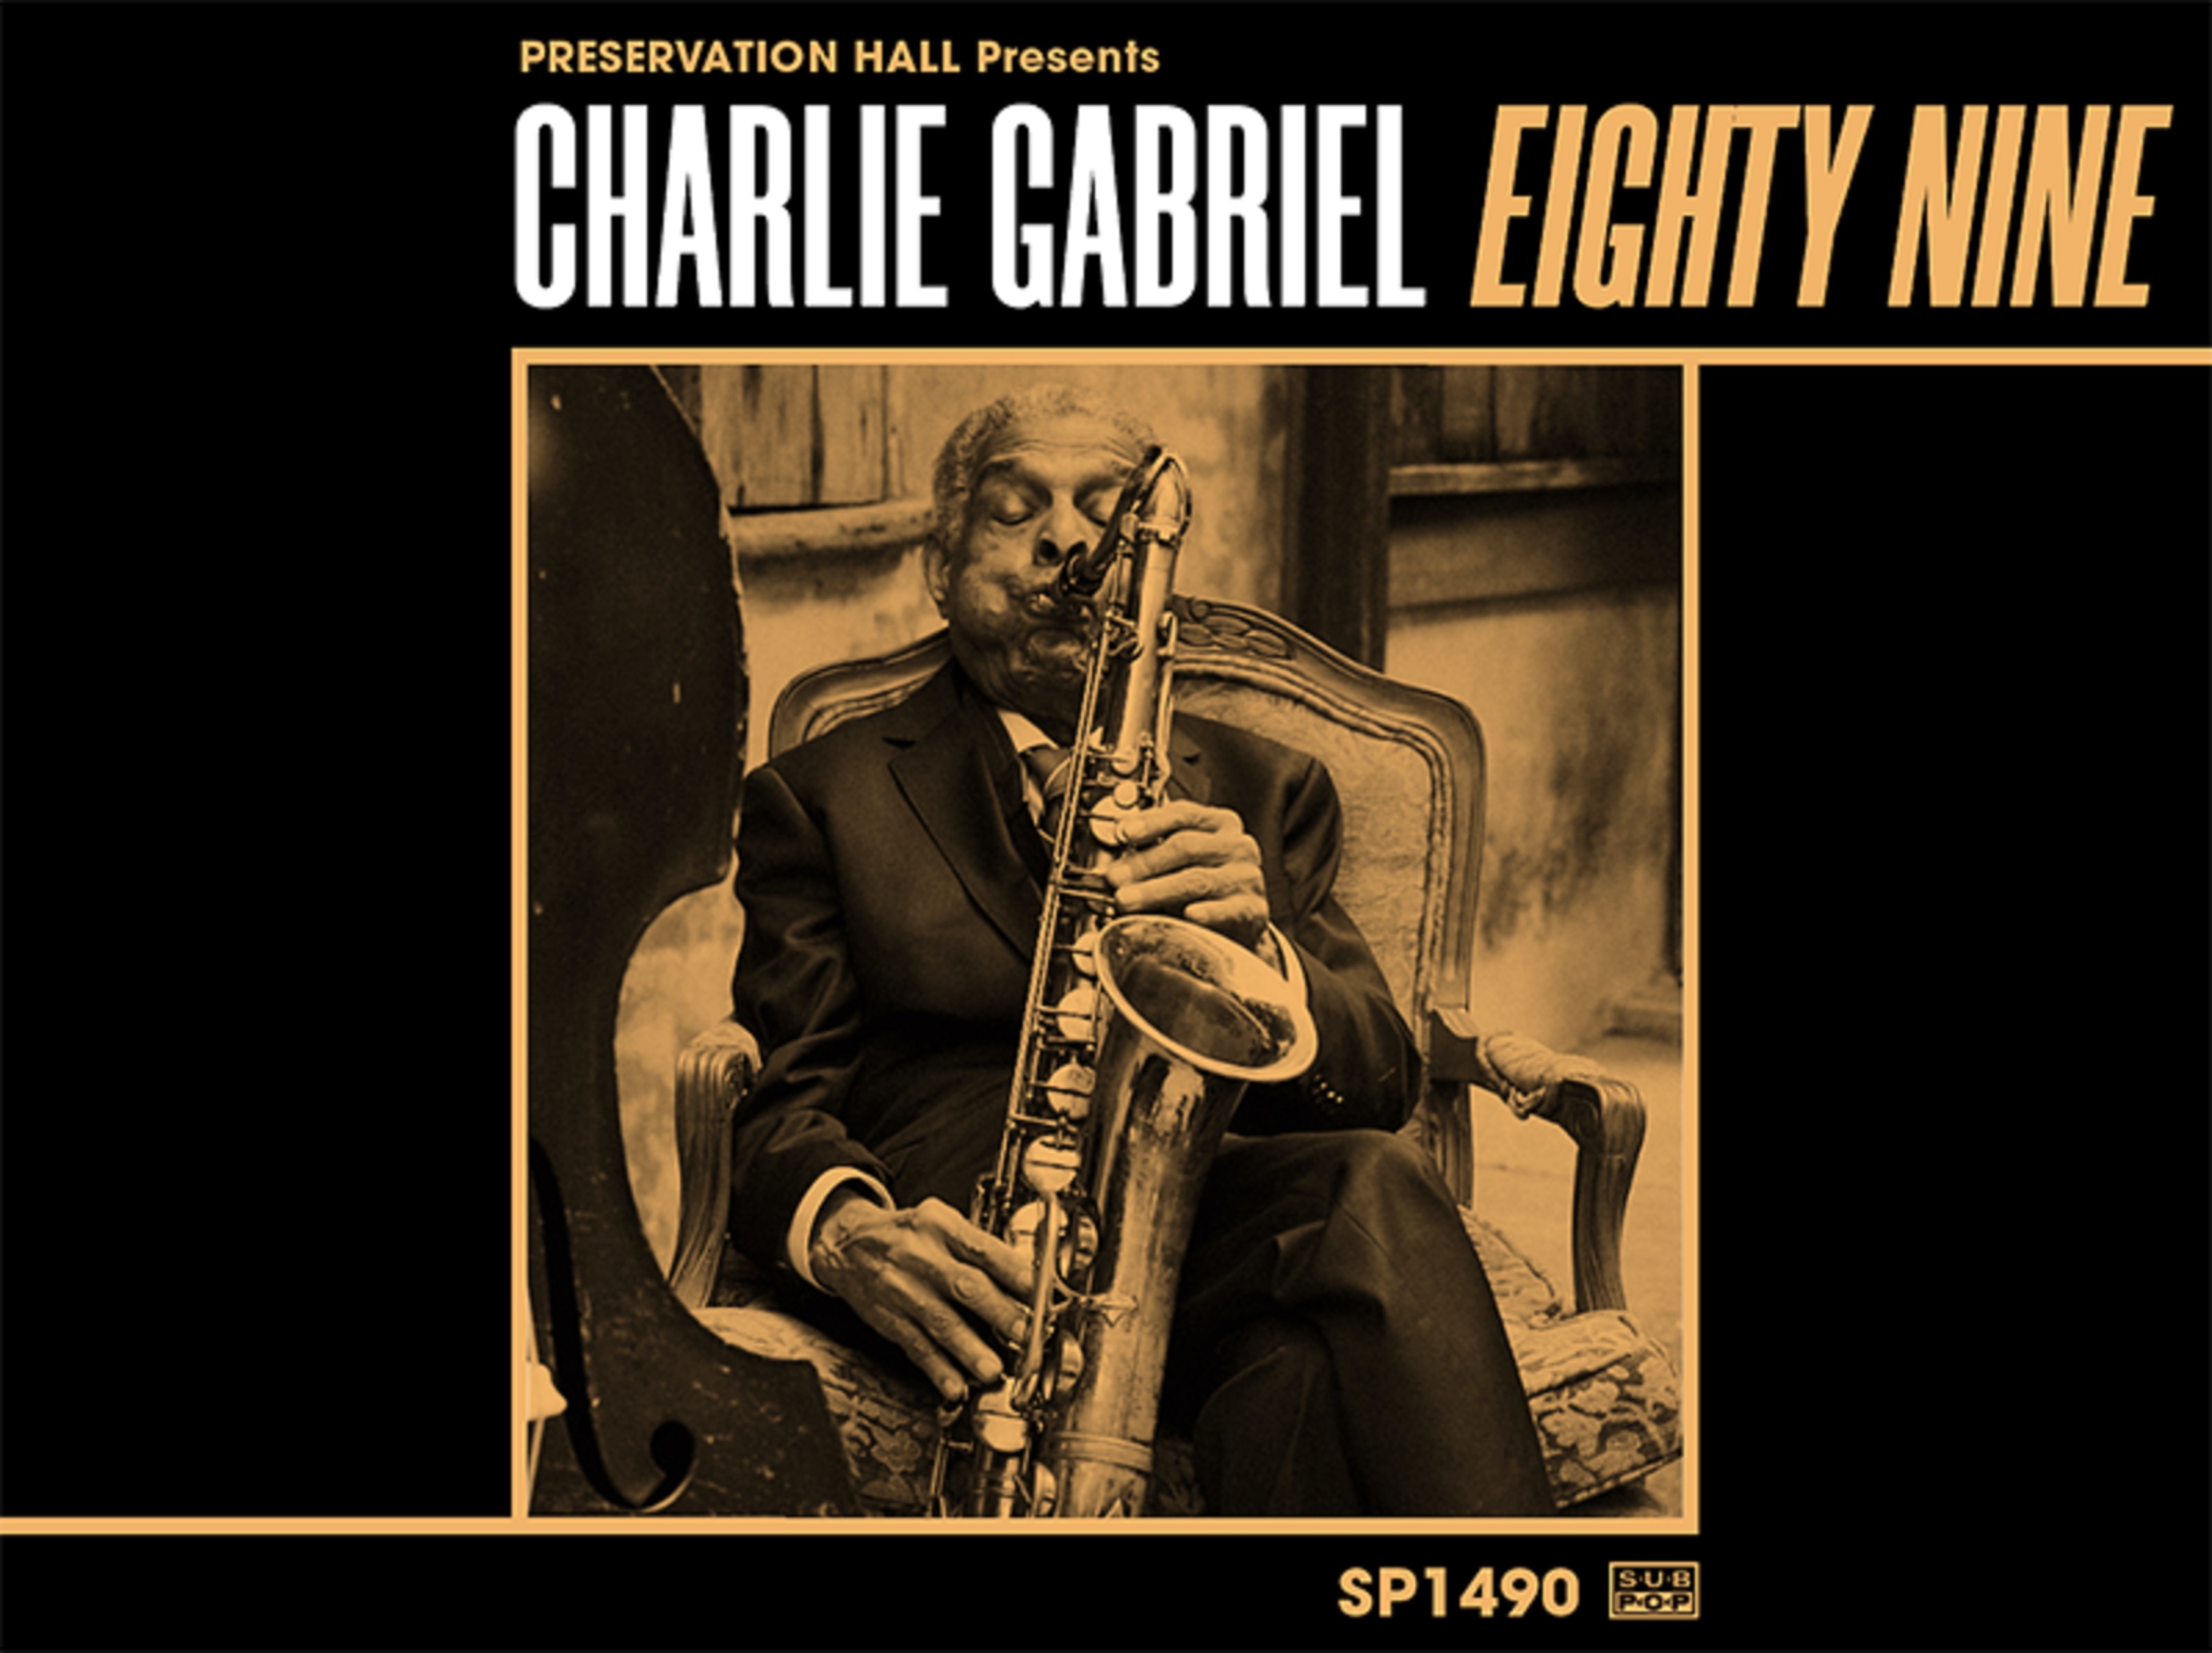 Charlie Gabriel's 89 is out now on vinyl!